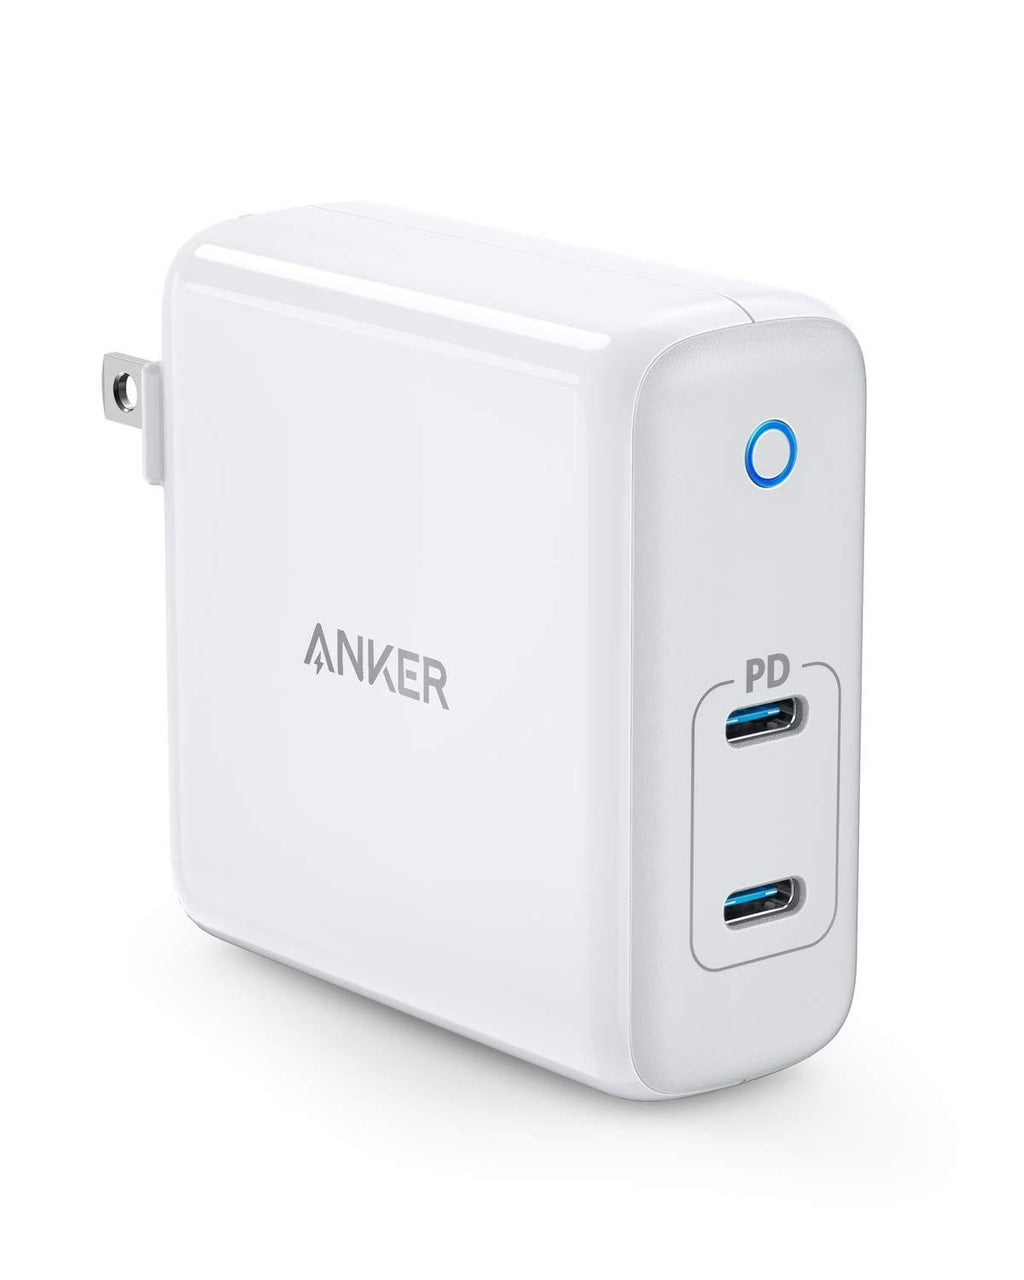 USB C Charger, Anker 60W 2-Port PowerPort Atom PD [GAN Tech] Foldable Wall Charger, Power Delivery for MacBook Pro/Air, iPad Pro, iPhone 12/11 / Pro/Ma x/XR/XS/X, Pixel, Galaxy, and More White